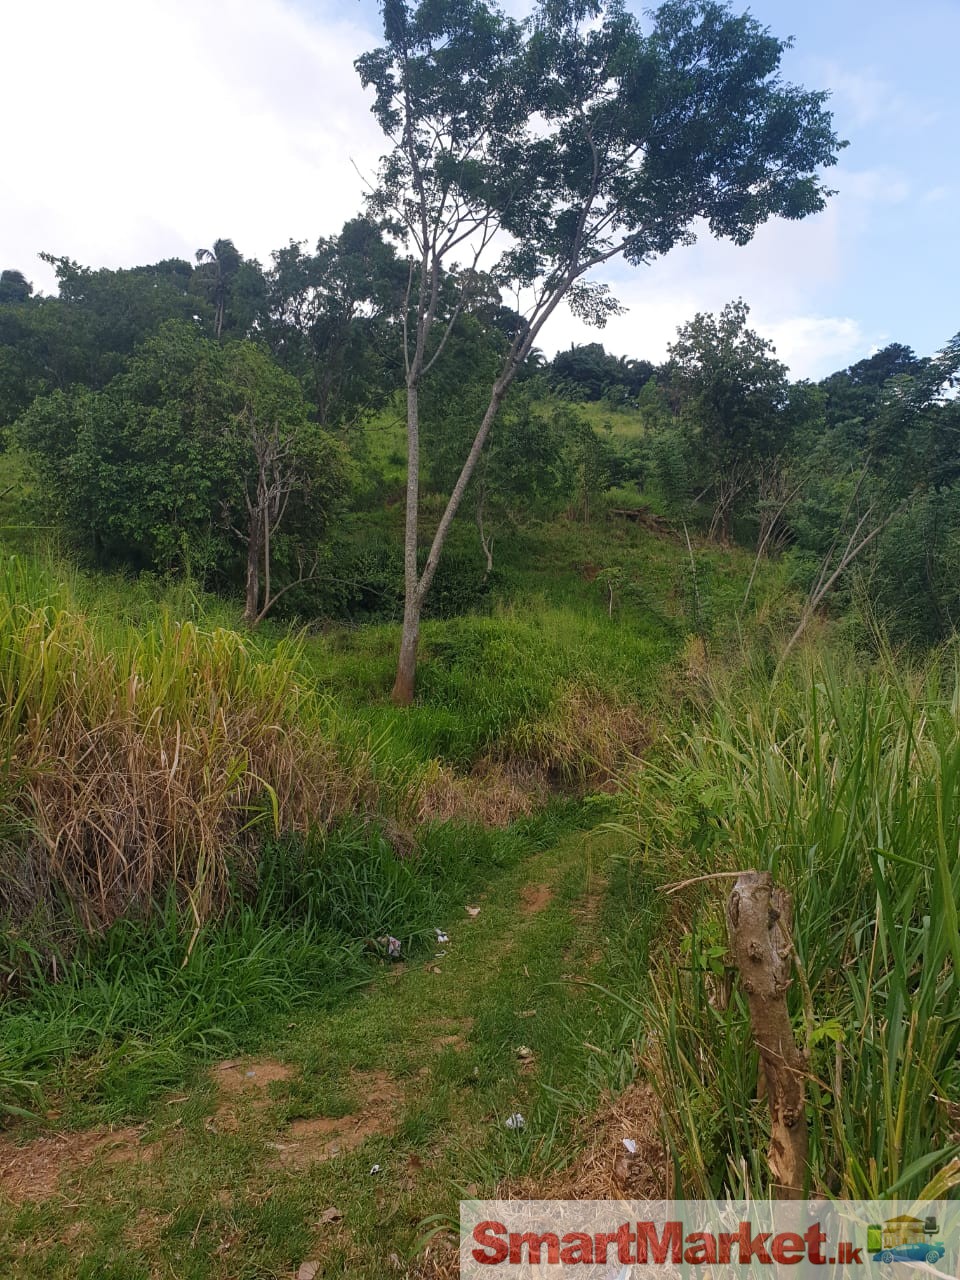 Valuable land for sale in Balangoda.